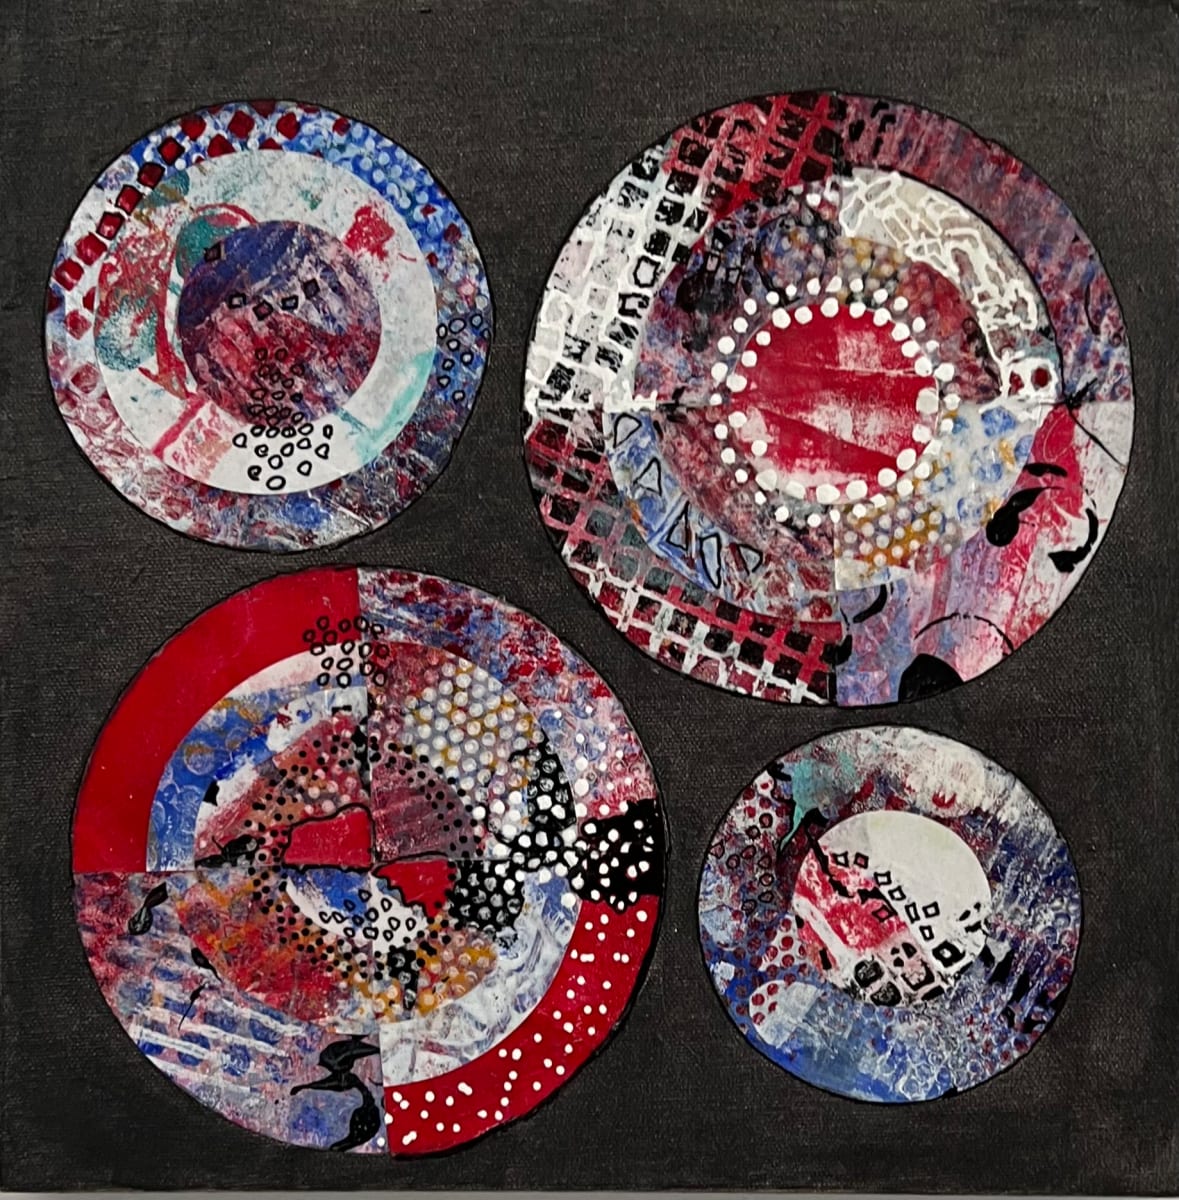 Abstract Circles on Canvas with Collage by Rebecca Zdybel 